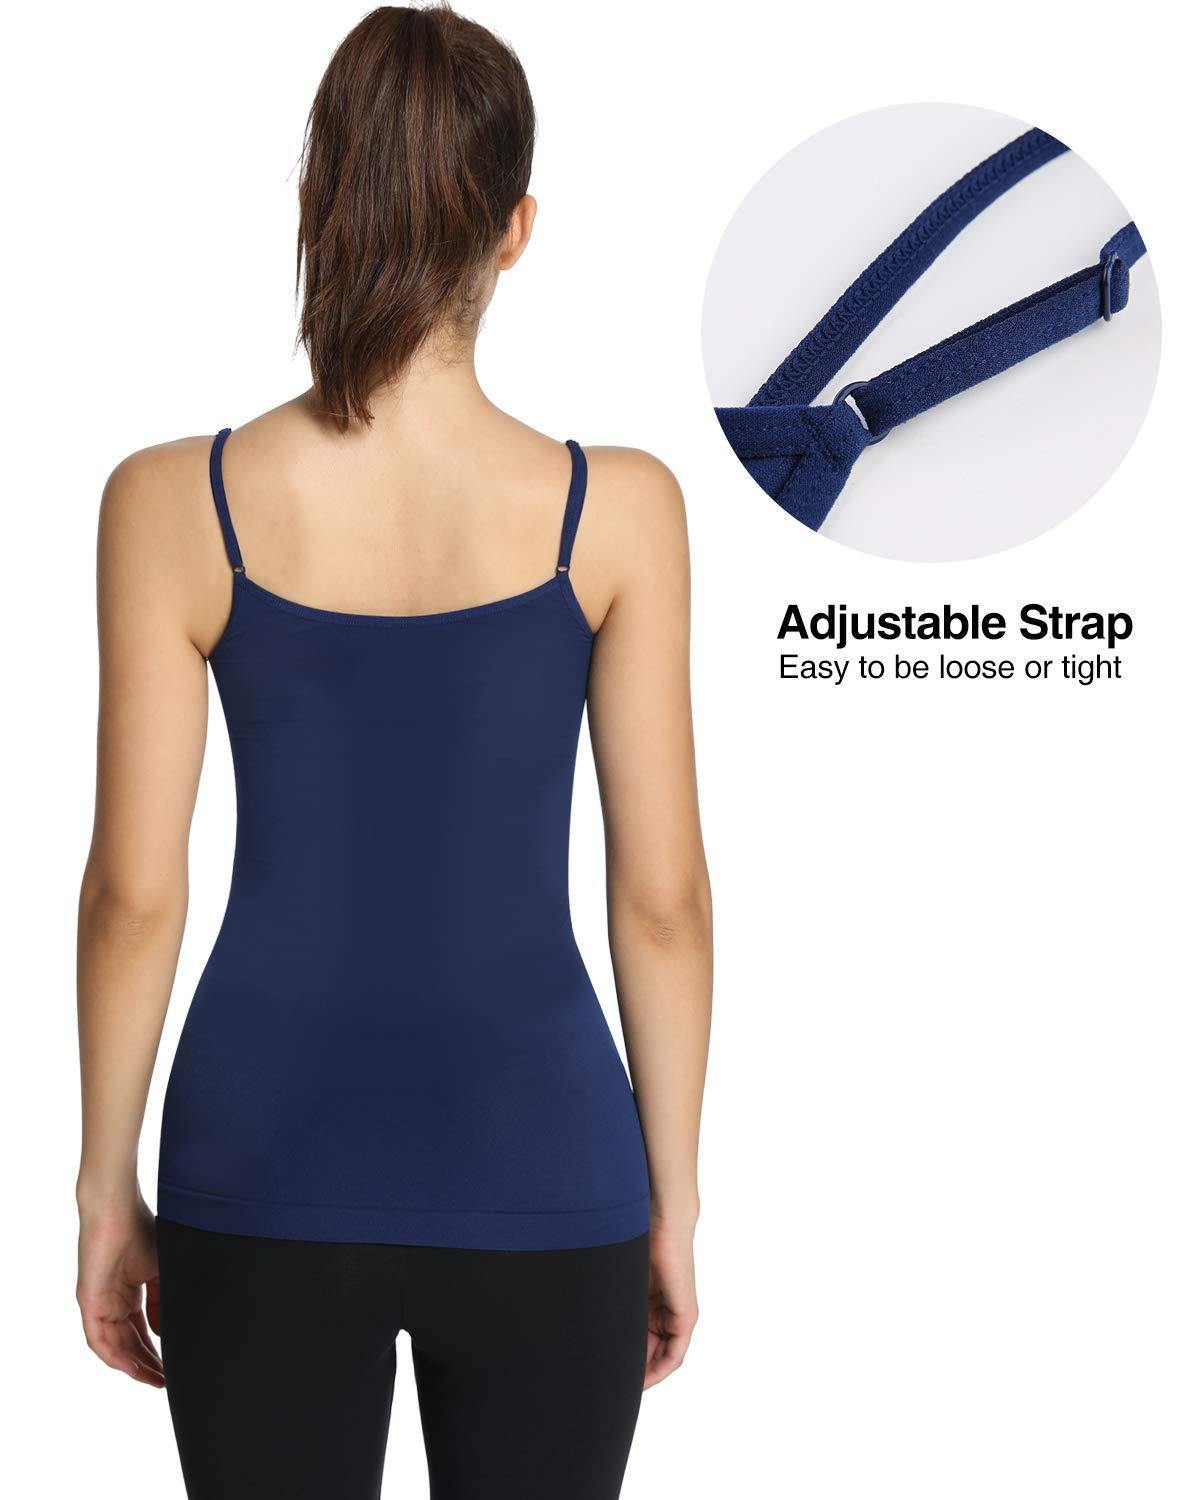 Cami Smoothing Top Adjustable Straps